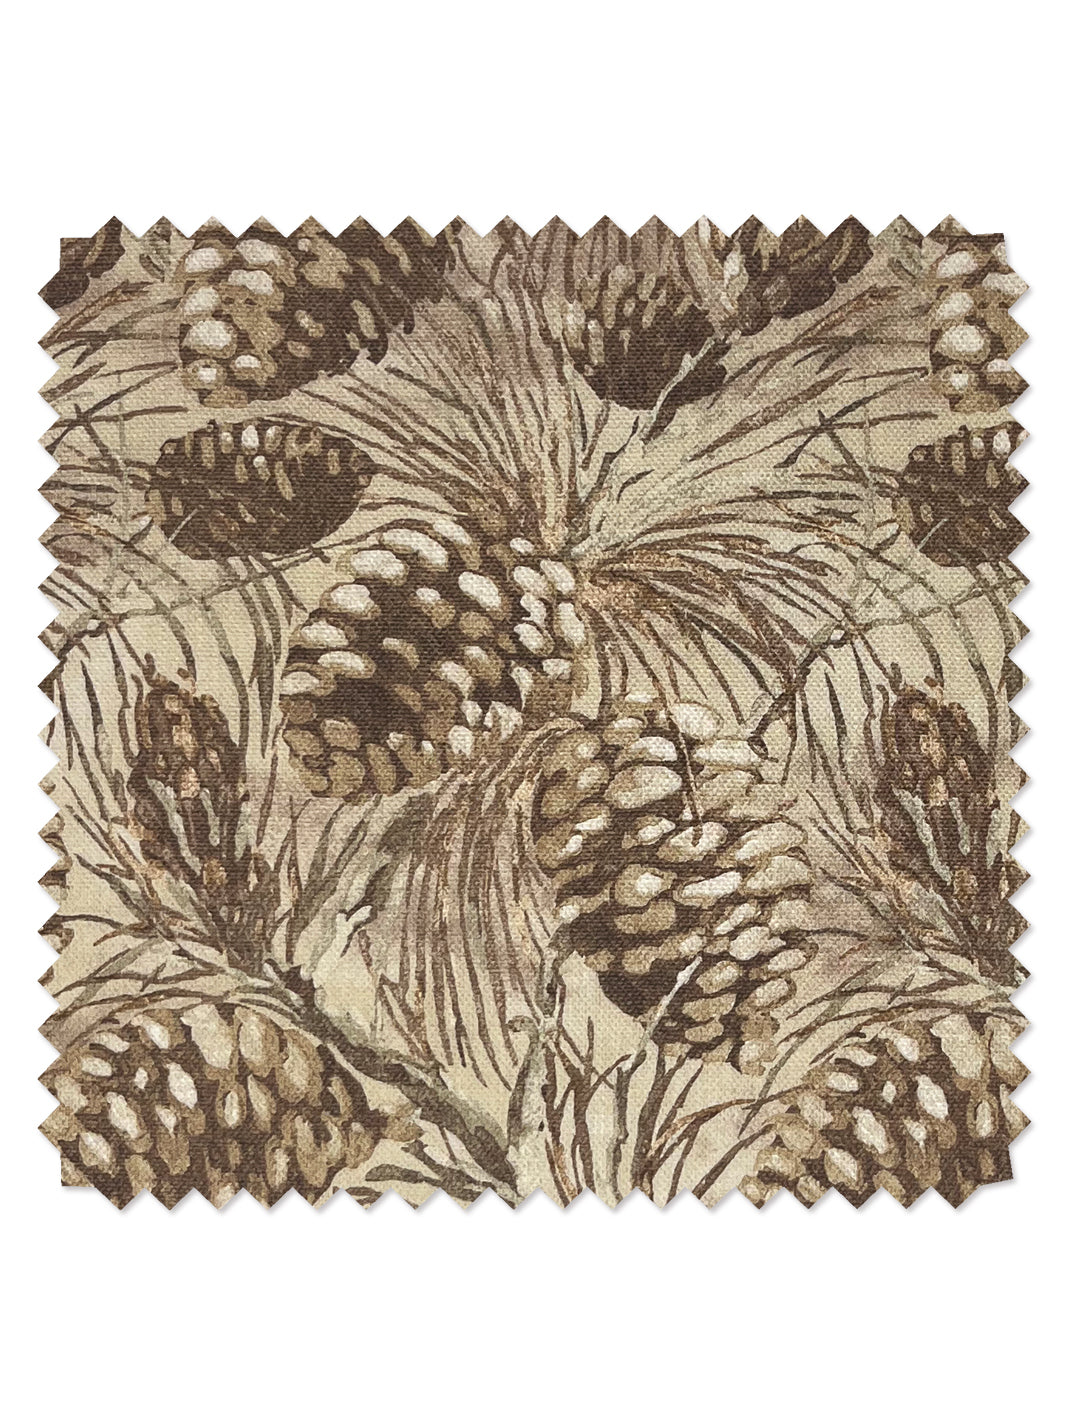 'Pinecones' Linen Fabric by Nathan Turner - Beige